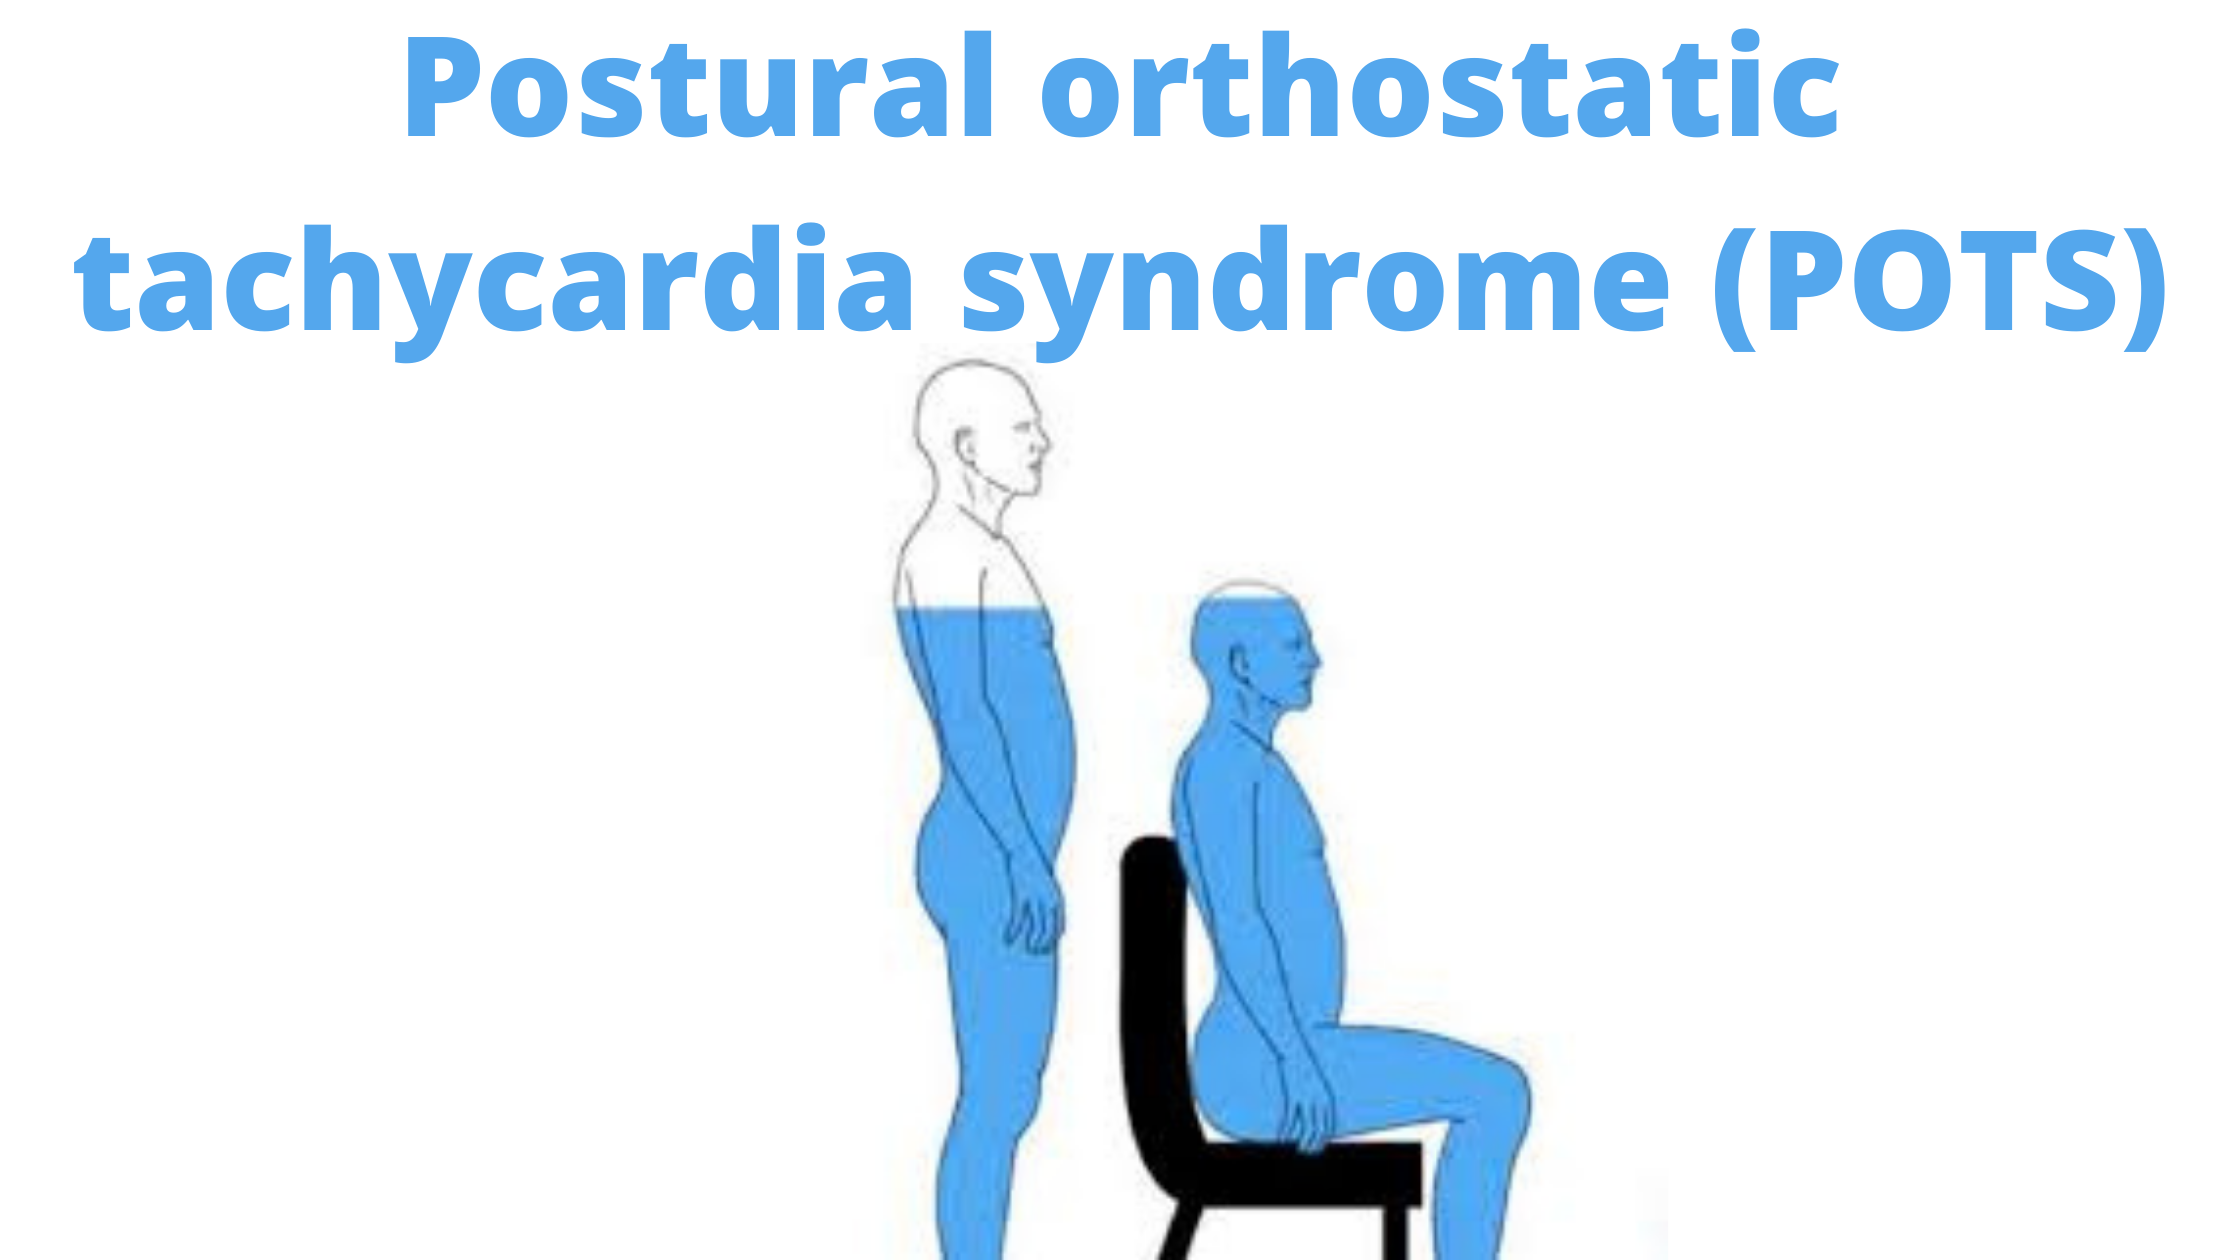 Understanding and Managing Postural Orthostatic Tachycardia Syndrome